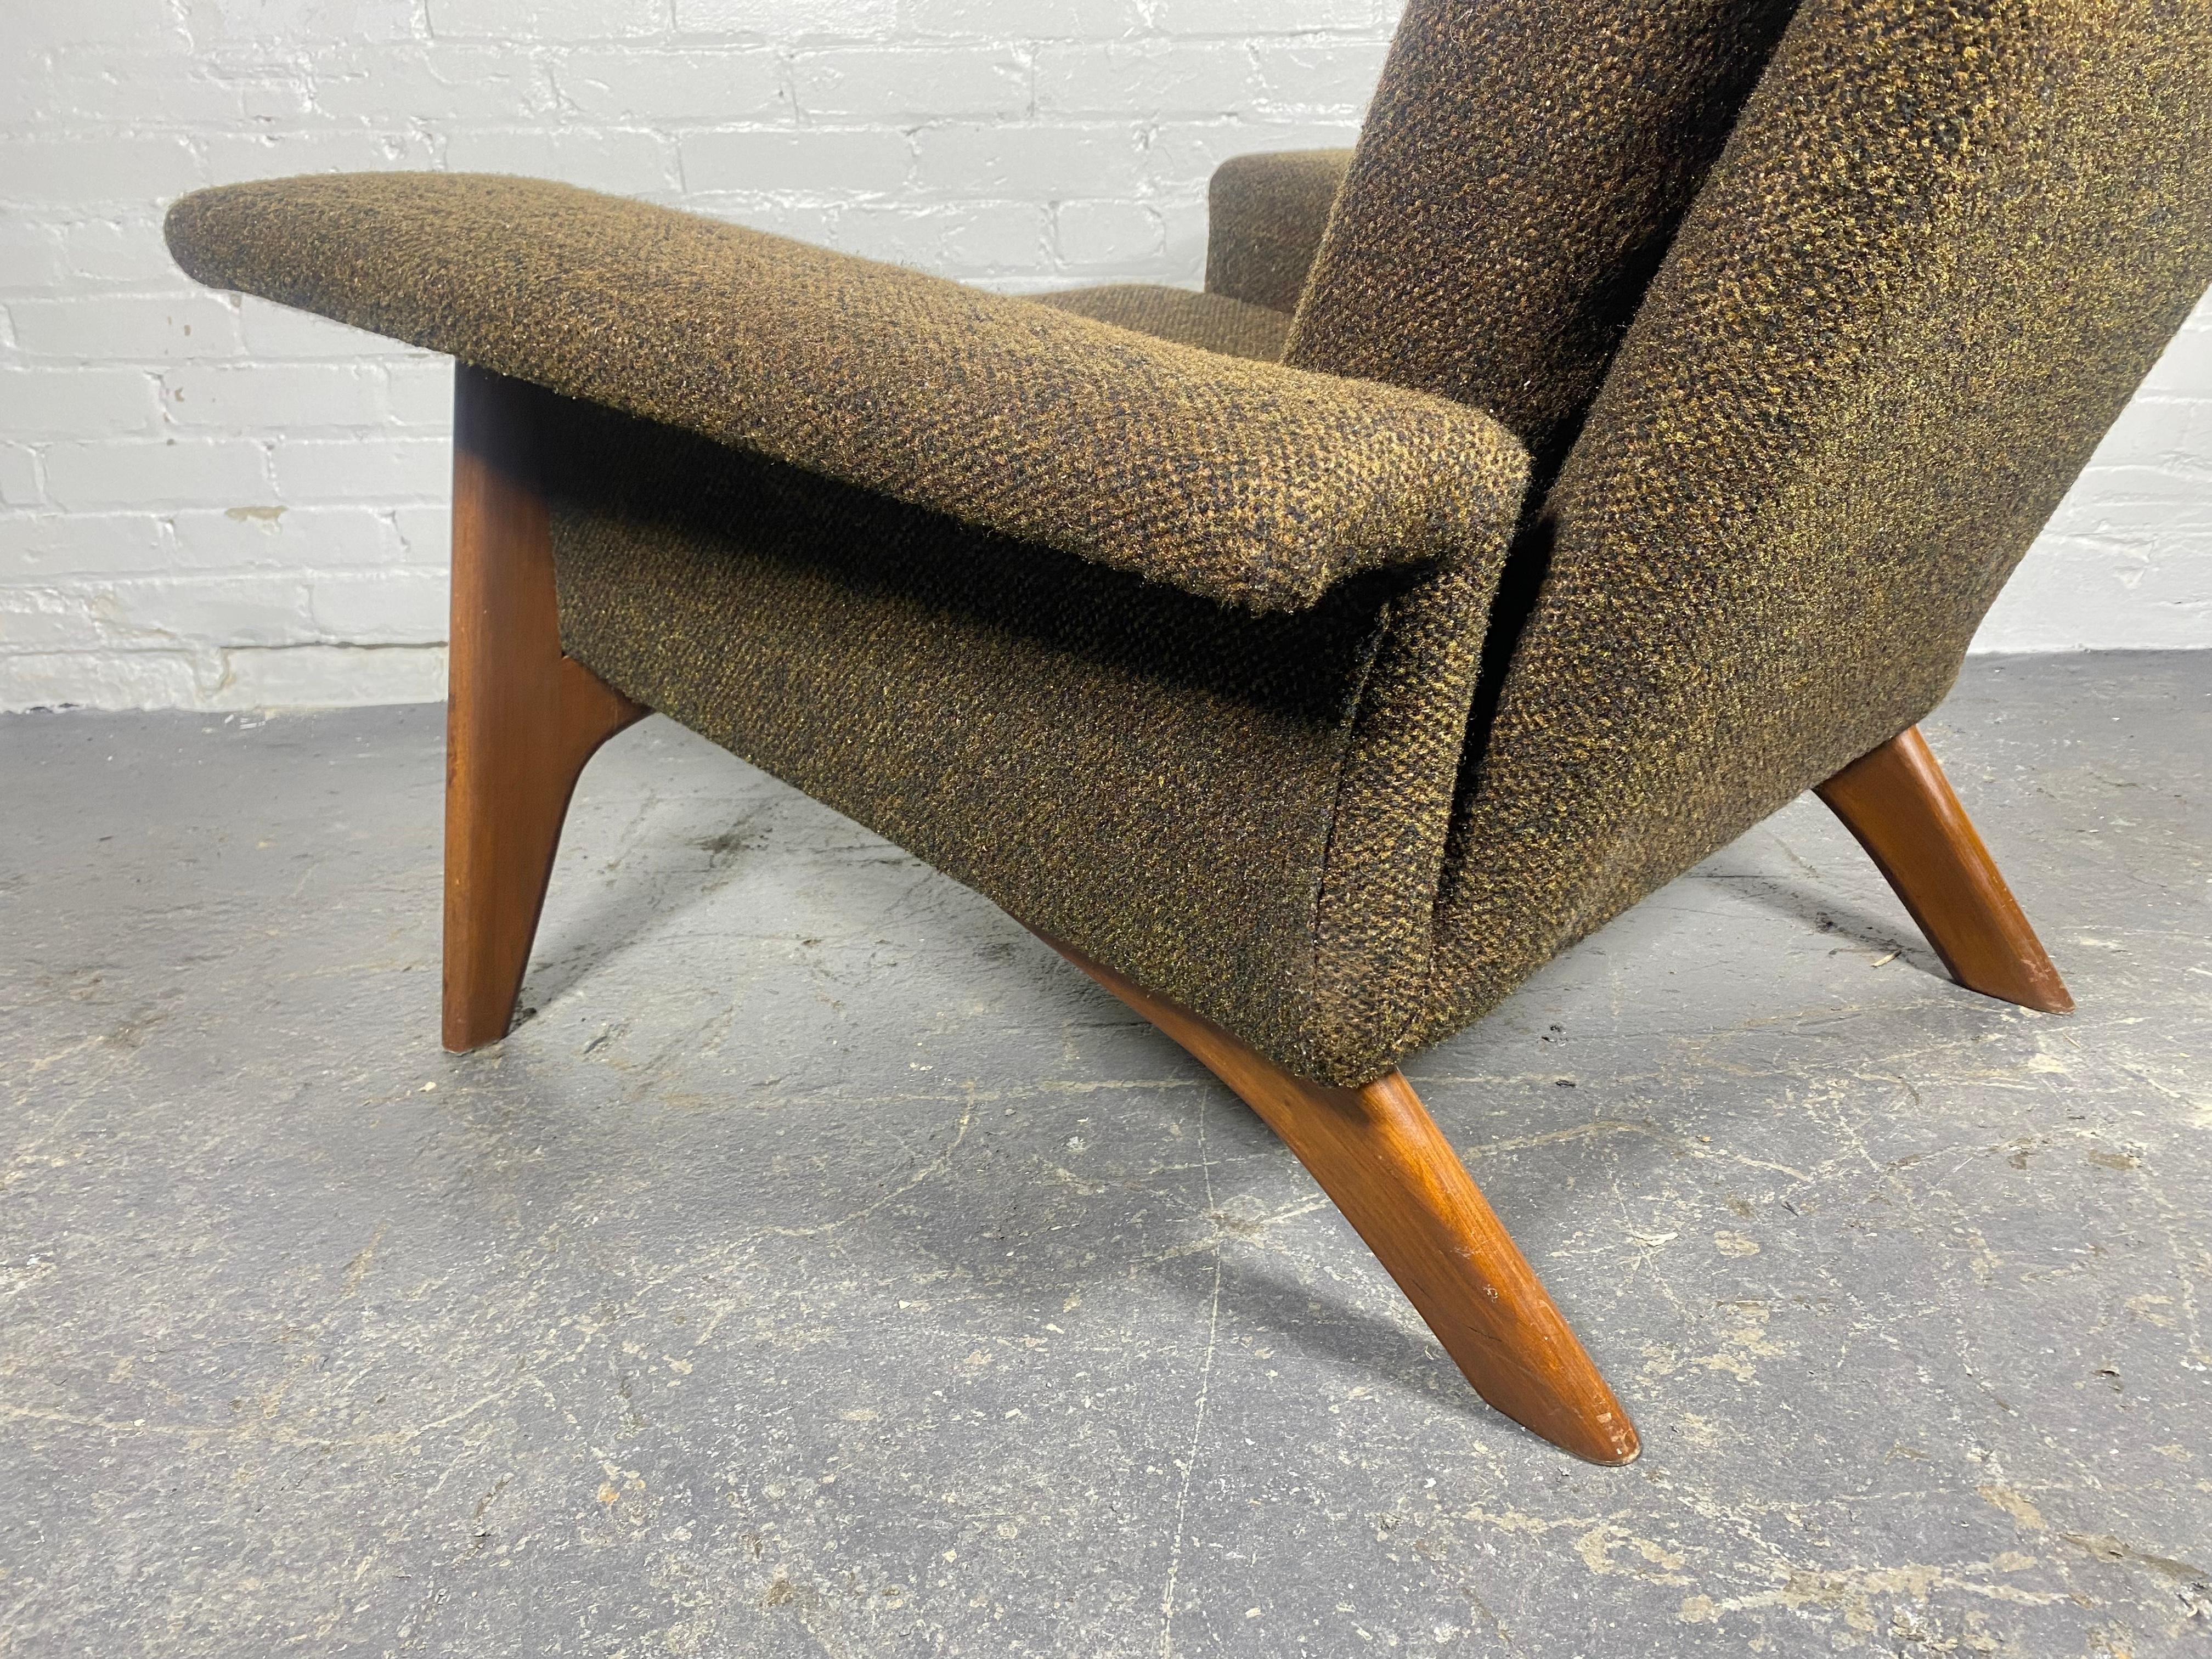 Dramatic Modernist Lounge Chair by Adrian Pearsall.Sculptural Walnut Base.. Classic Mid Century Modern design,, Wonderful form,, great lines, Extremely comfortable, Retains original brown wool fabric upholstery ,,also original finish / patina to